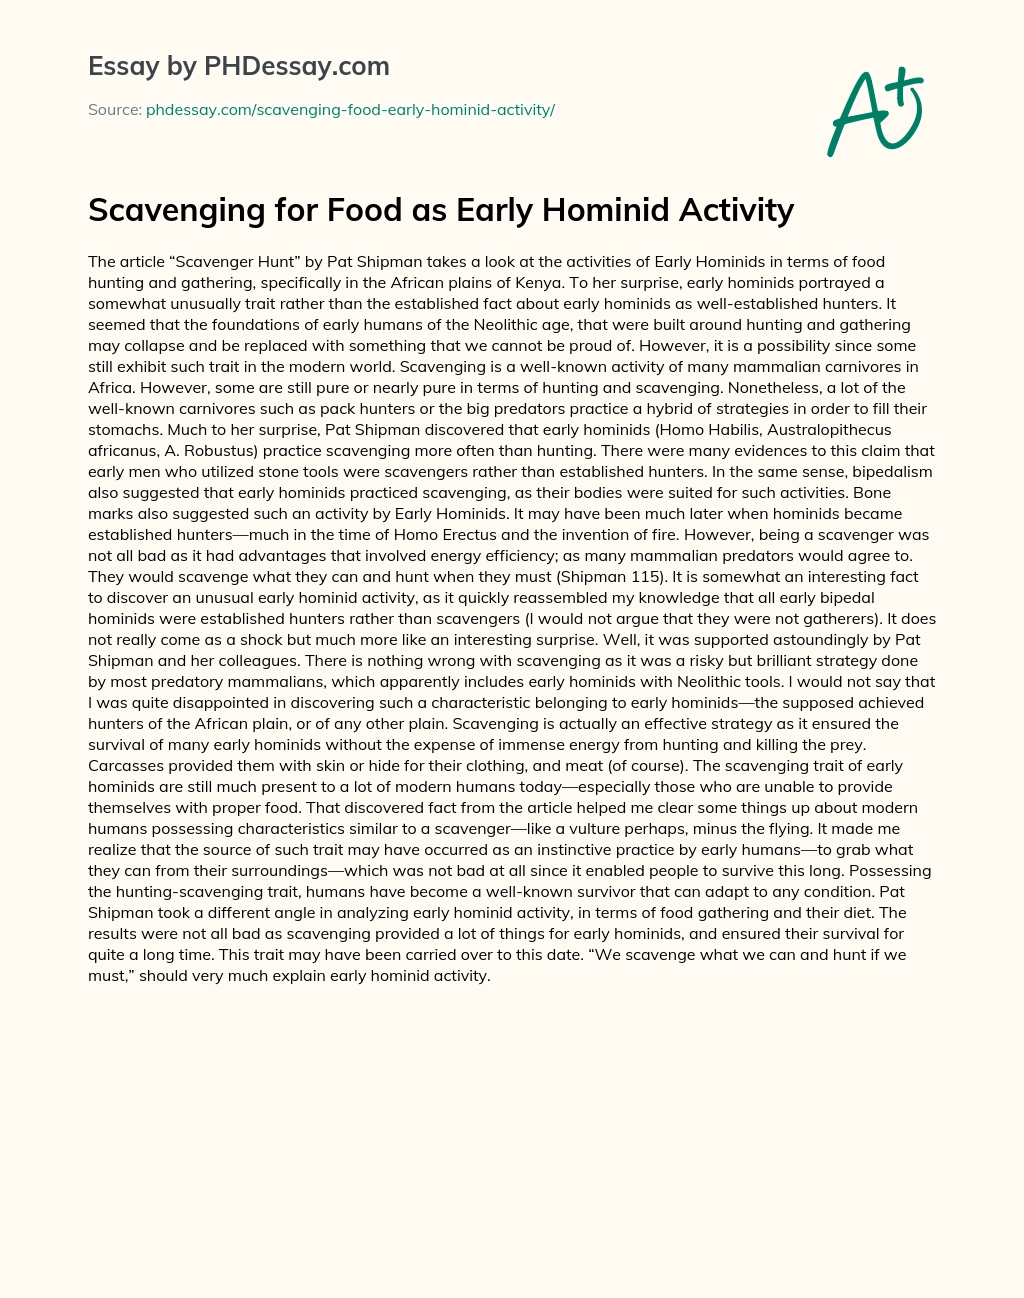 Scavenging for Food as Early Hominid Activity essay